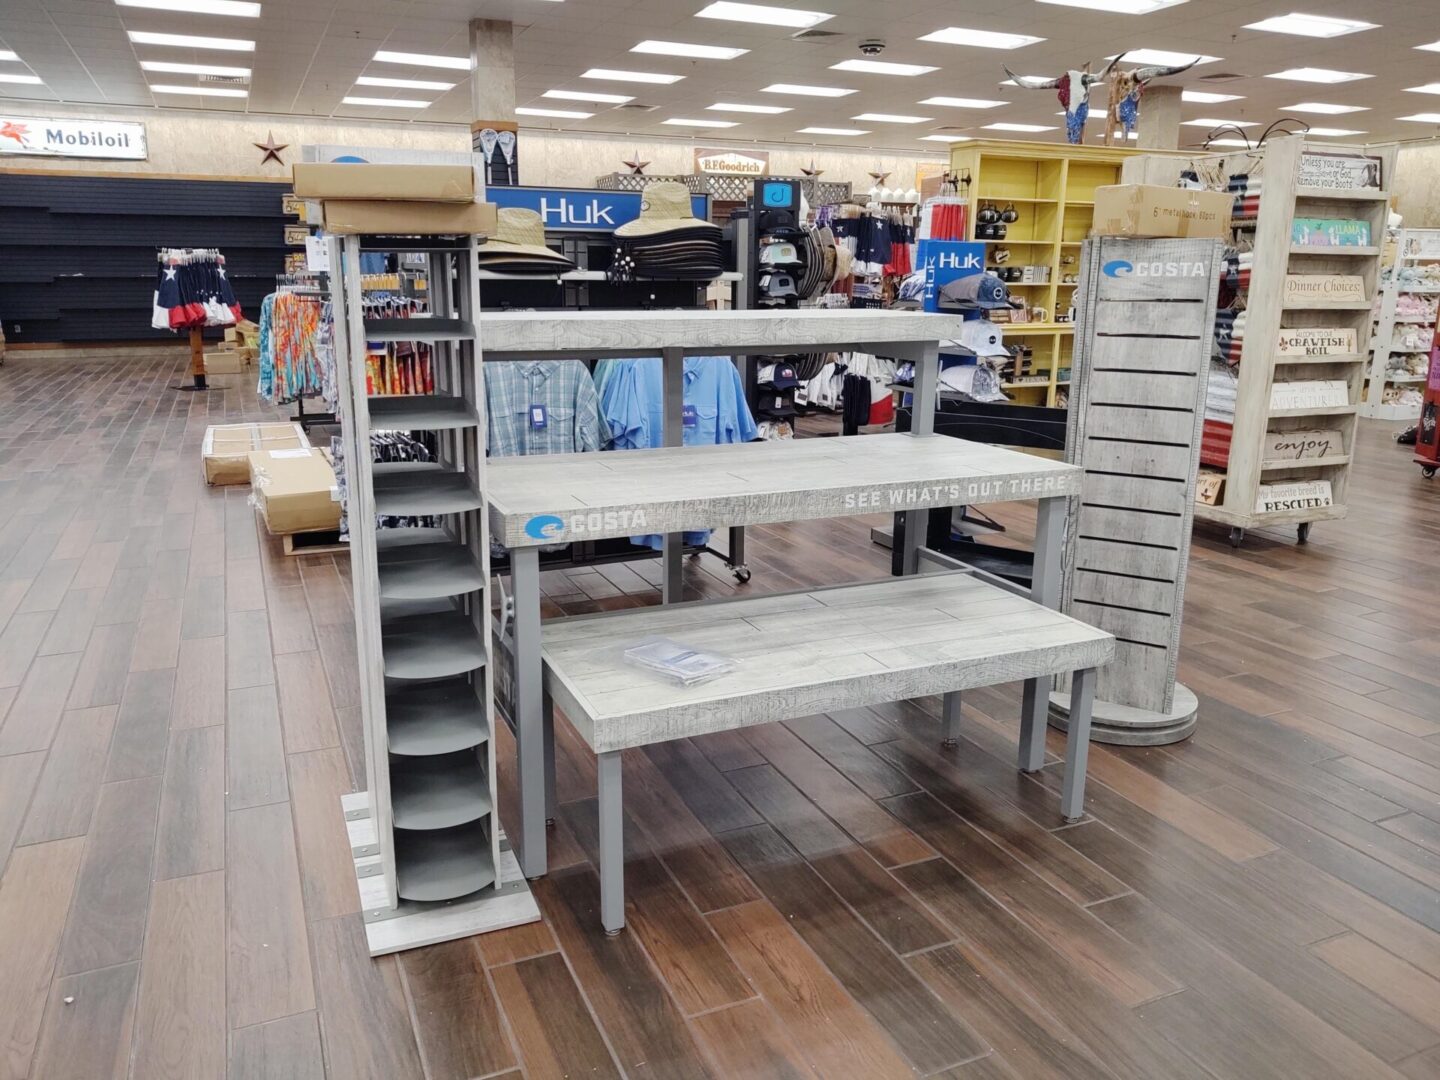 Costa display stands and tables